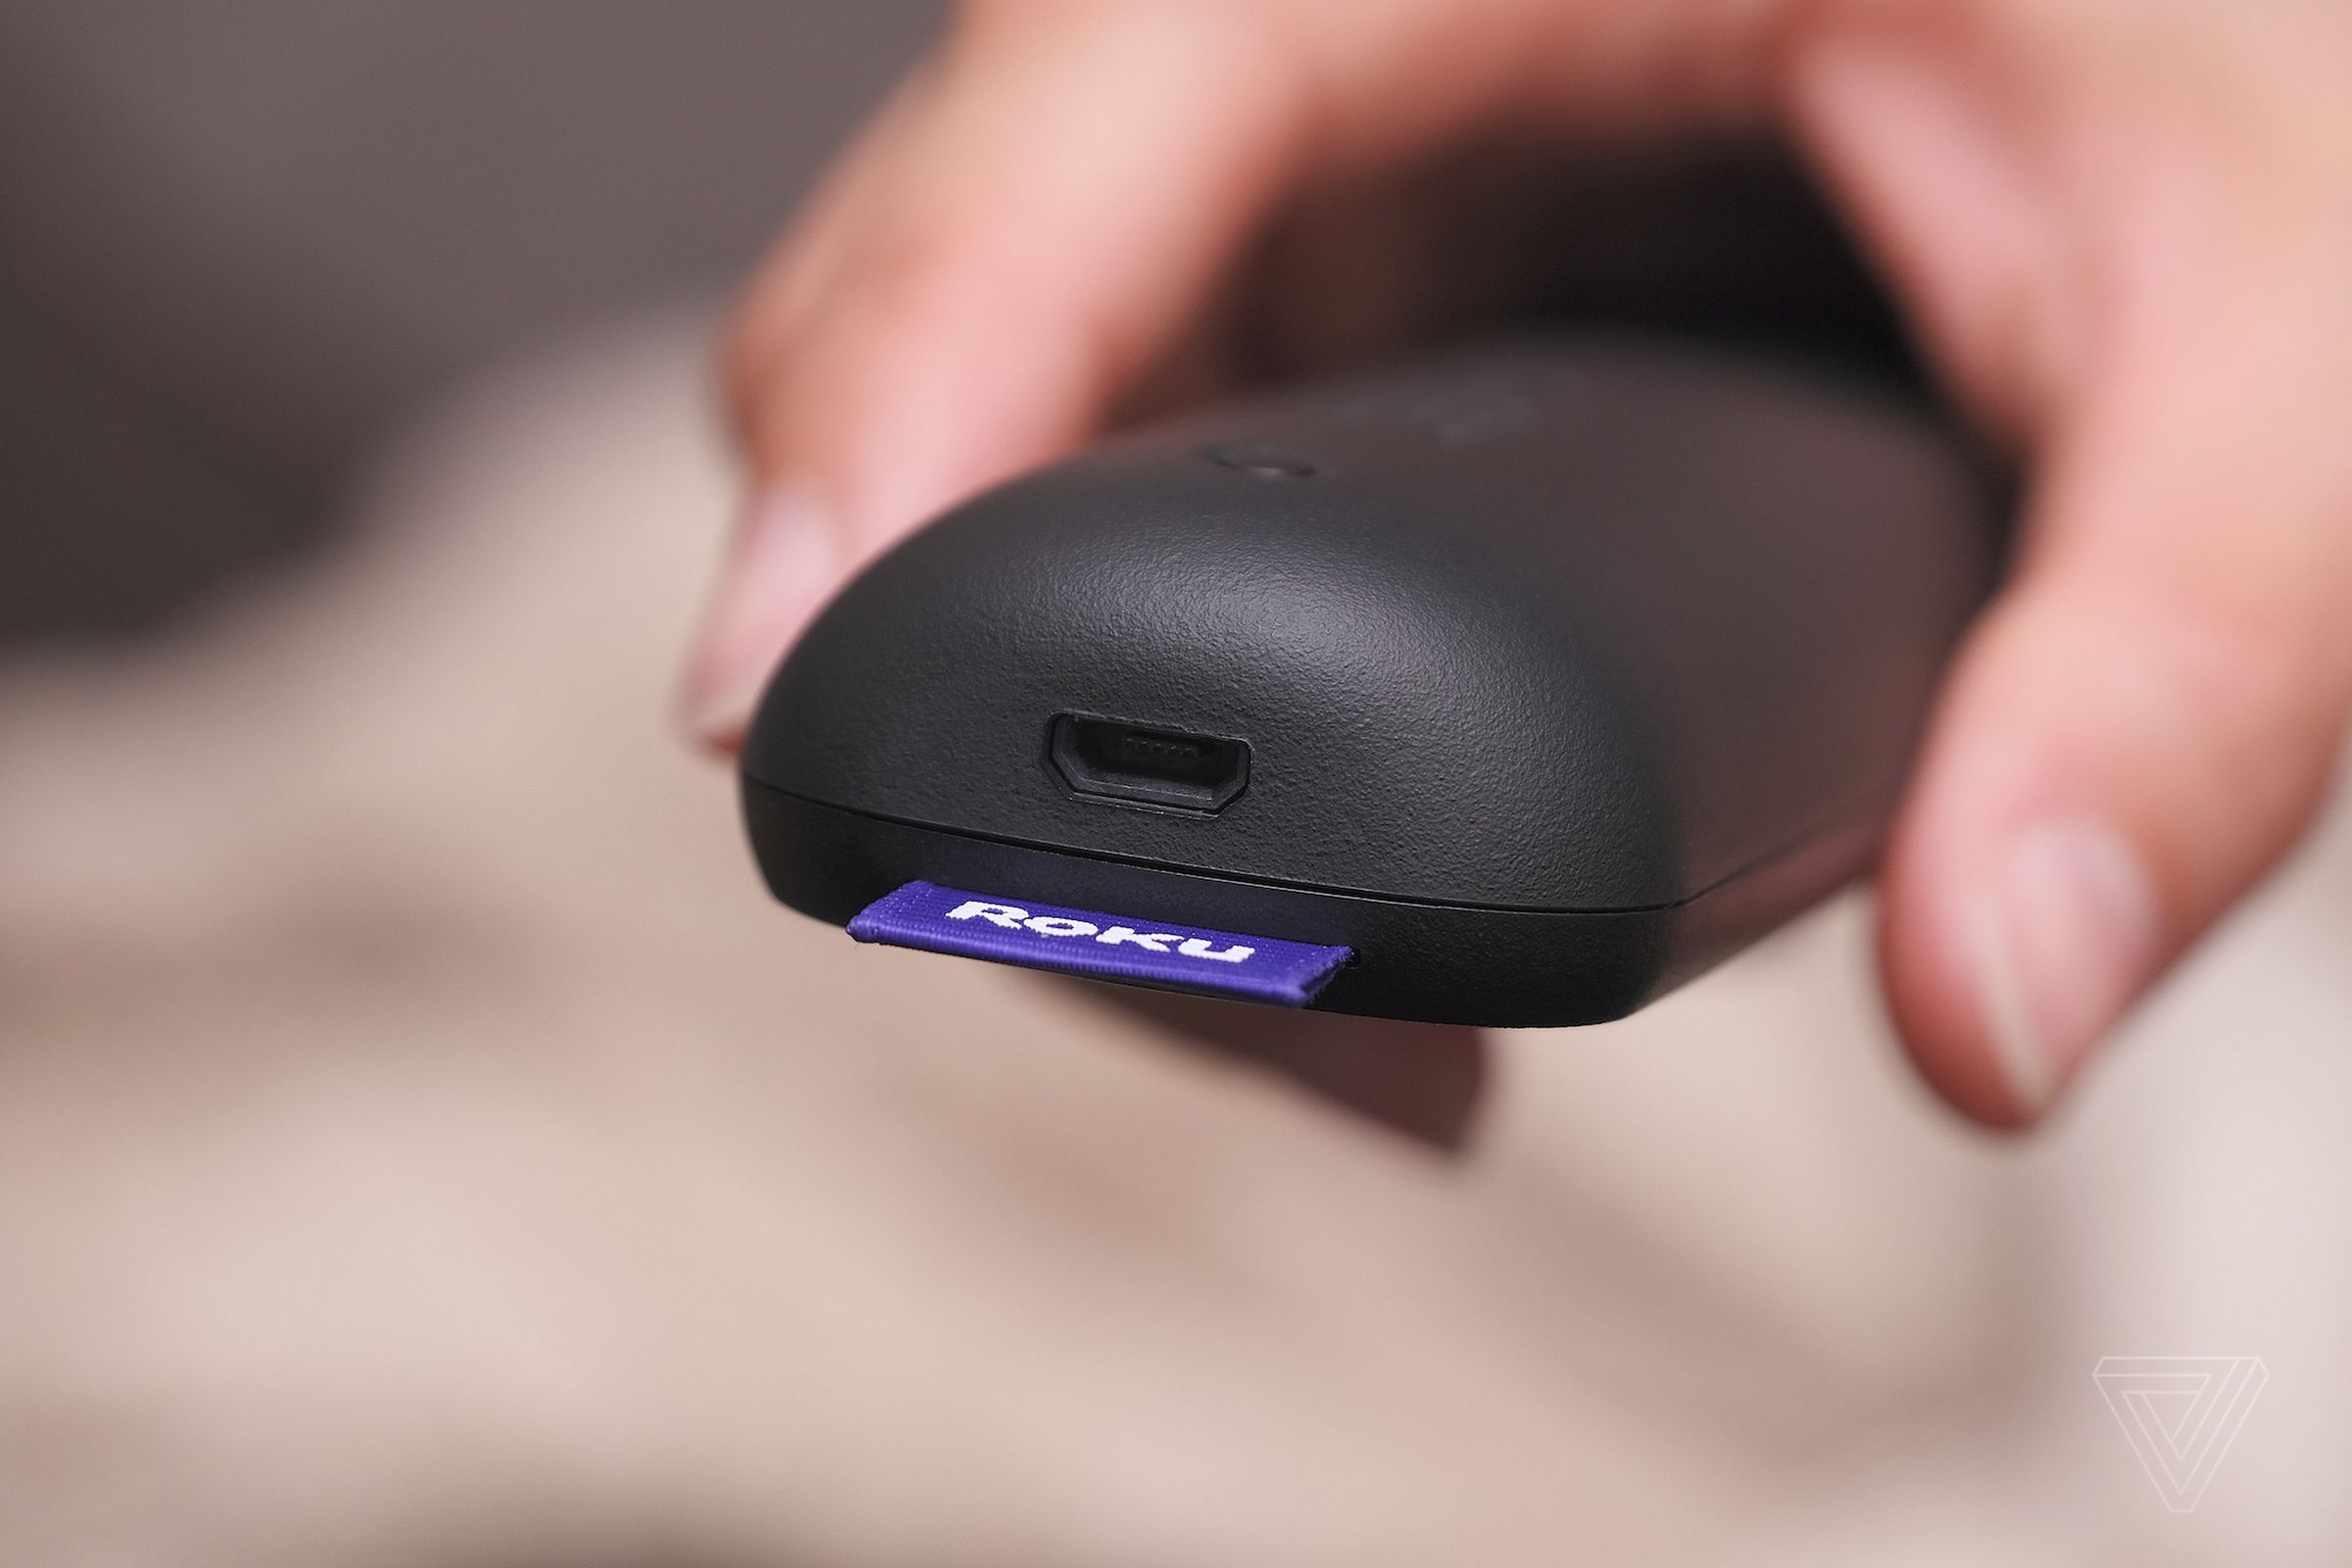 The Voice Remote Pro has a rechargeable battery that uses a Micro USB connector.